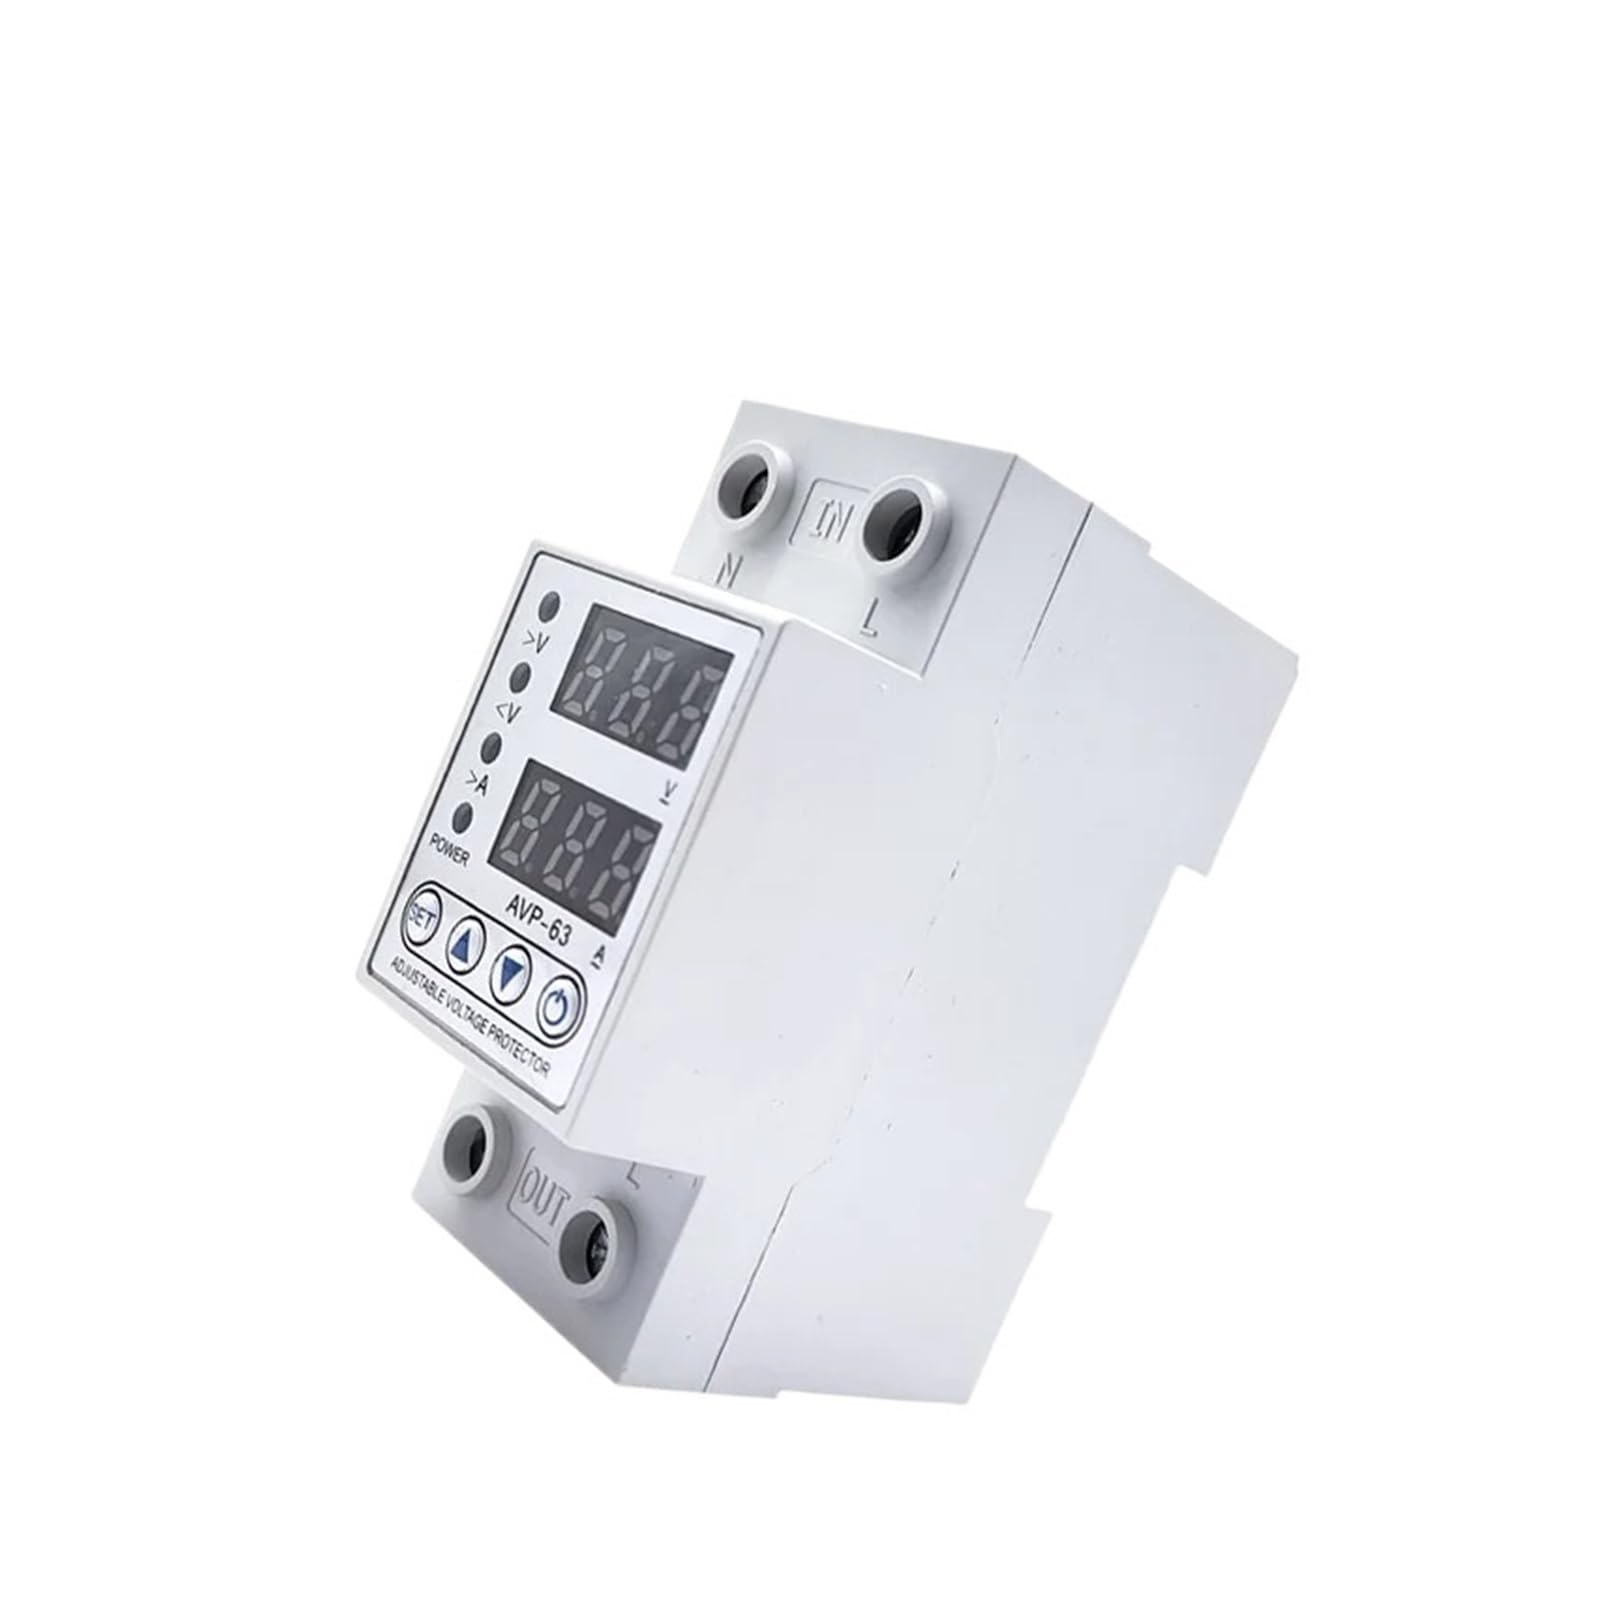 AVP 40A 63A 230V Overvoltage Current Reclosing Protector Under Voltage Protective with Dual Digital Display 40A 63A 80A 220V NWPNLXEA(63A) von NWPNLXEA